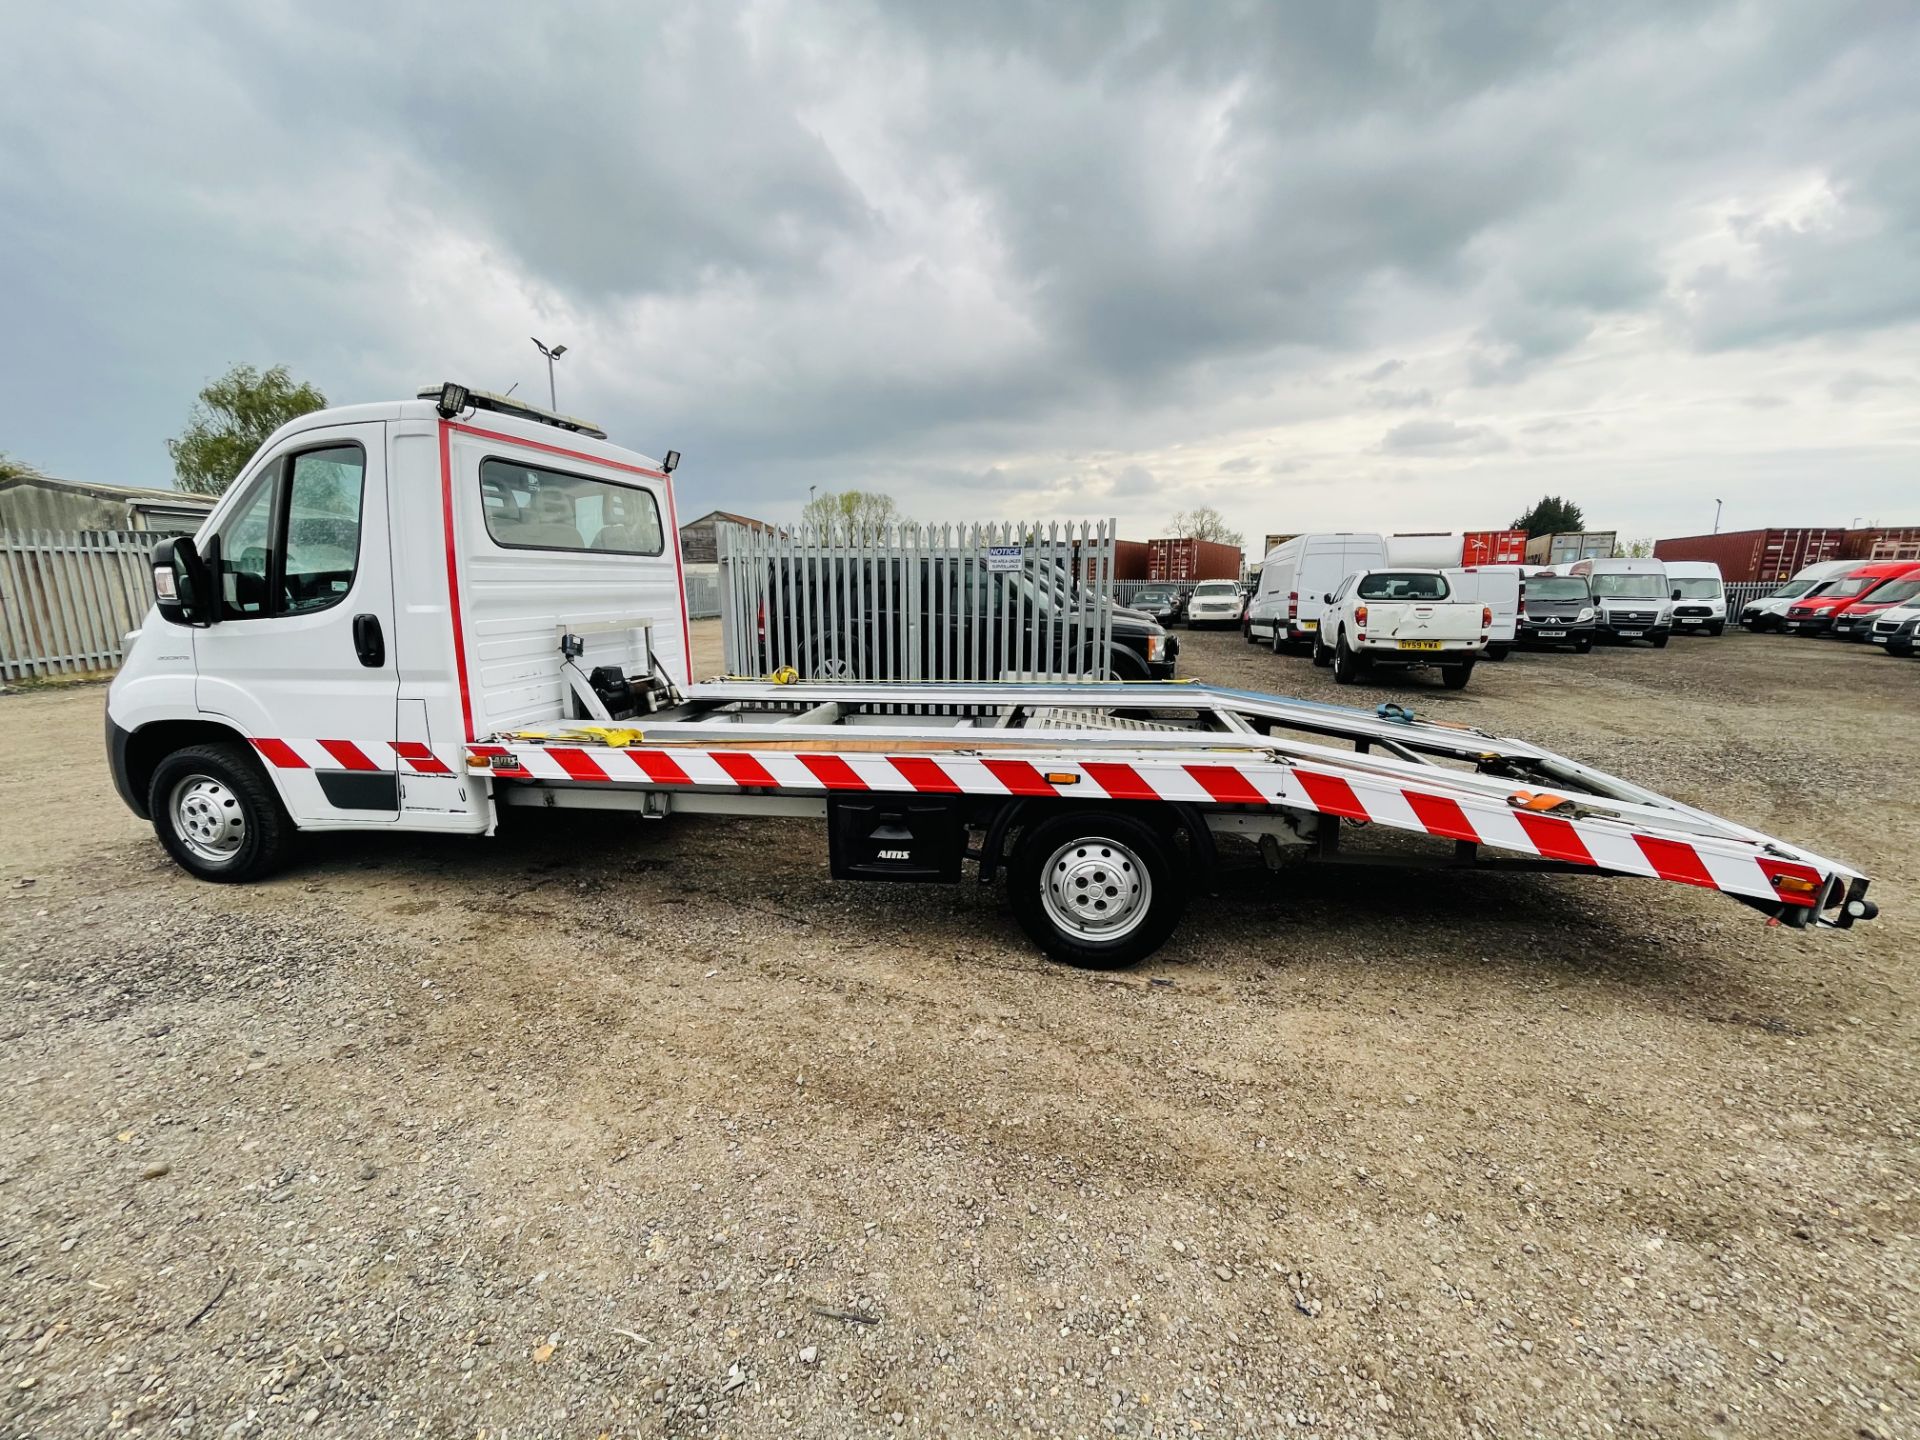 ** ON SALE ** Fiat Ducato 2.3 Multi-jet L3 2017 '17 Reg' Recovery Beaver-Tail -Air con- Alloy body - Image 8 of 17